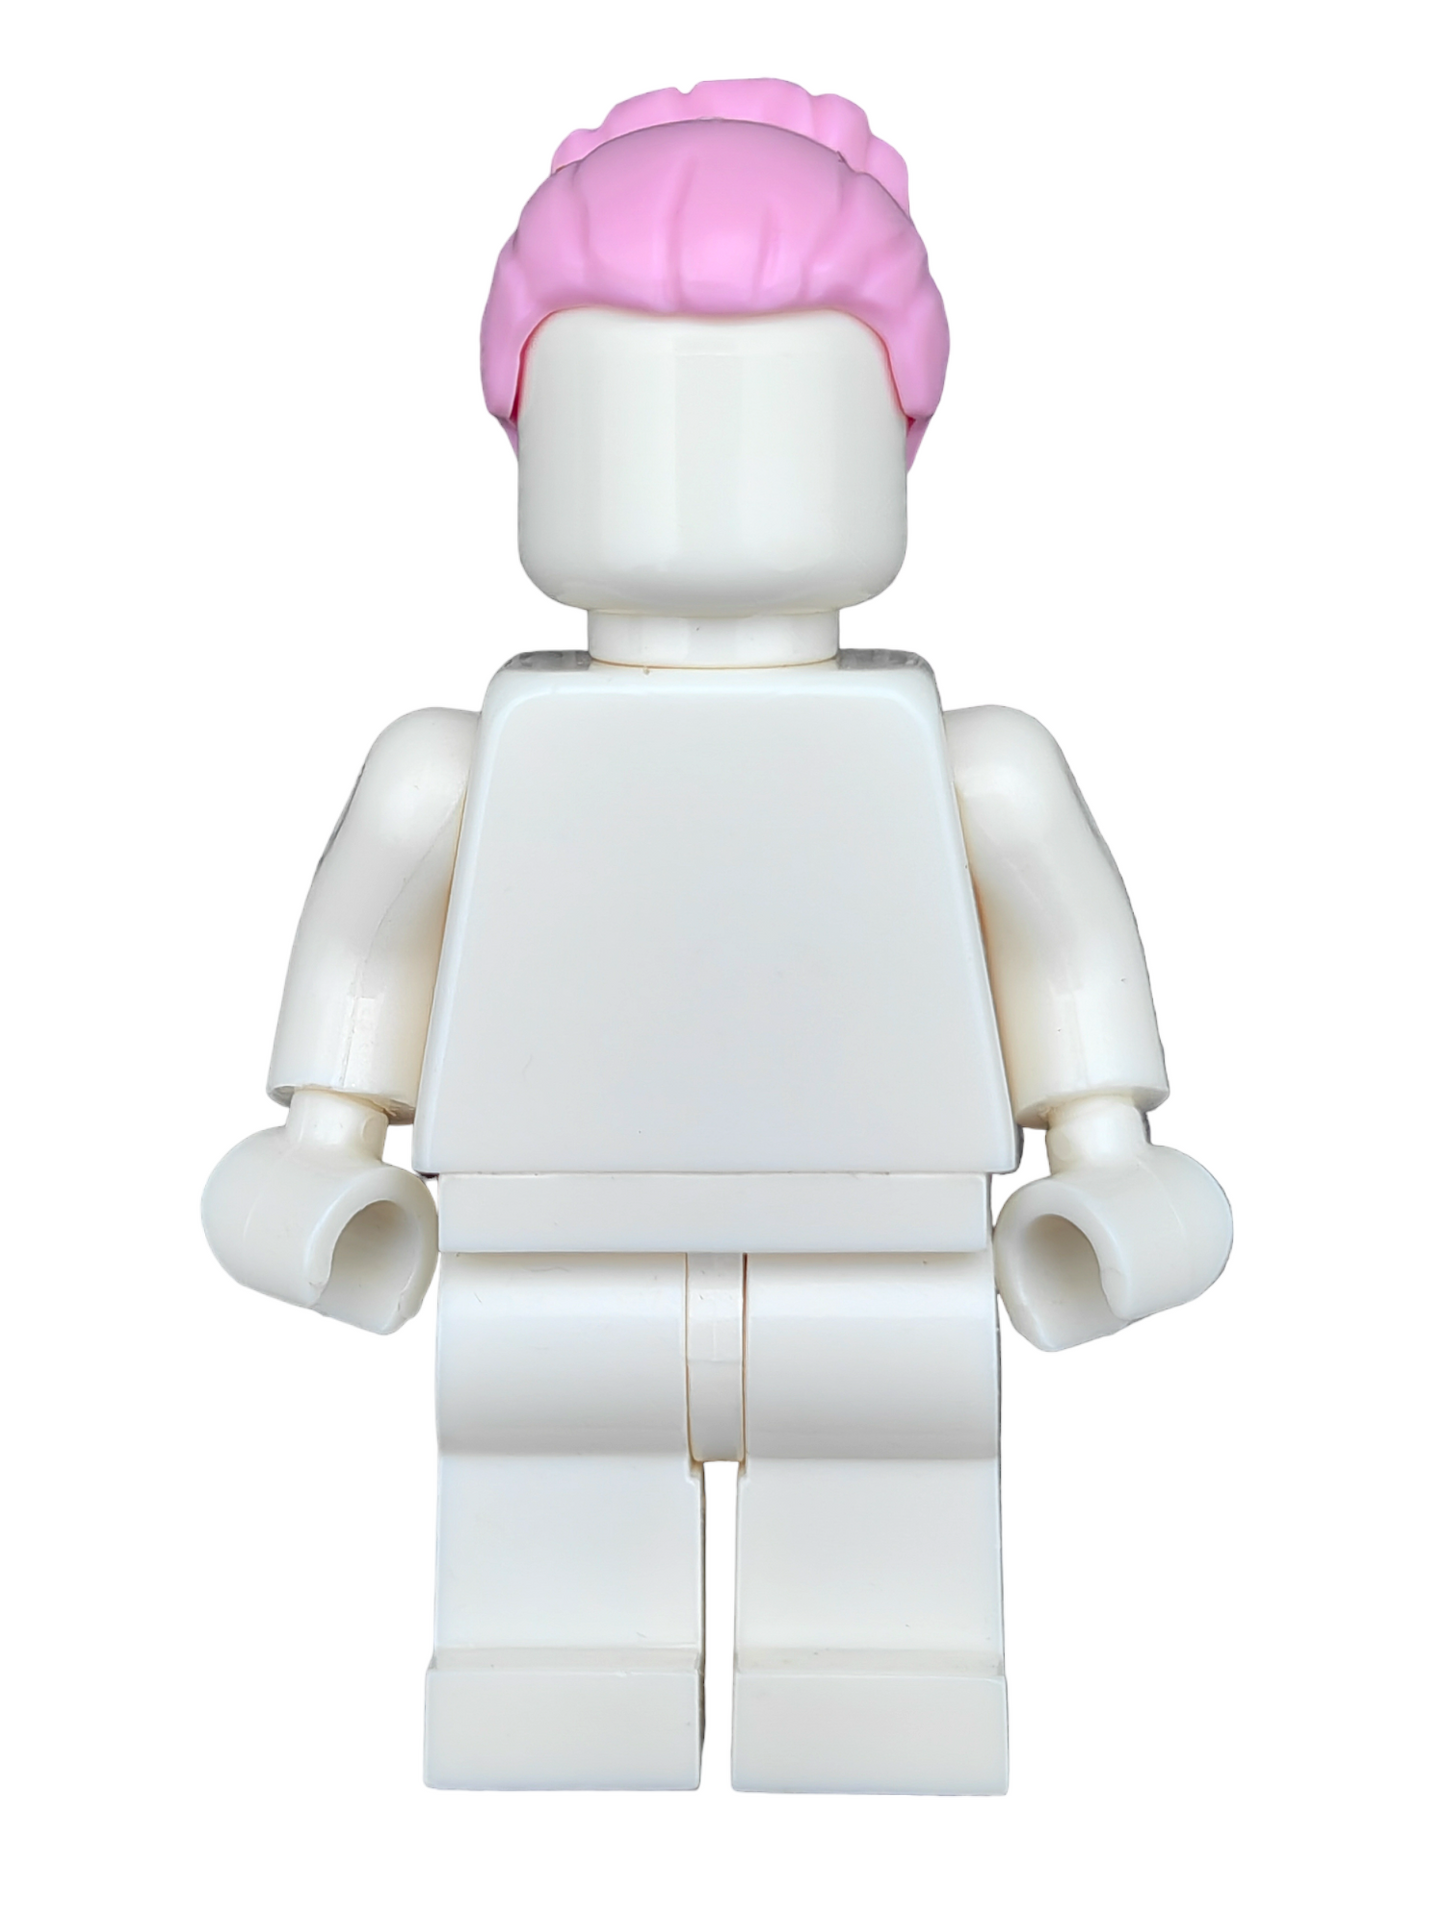 LEGO Wig, Pink Hair with Large Bun High to the Back - UB1262